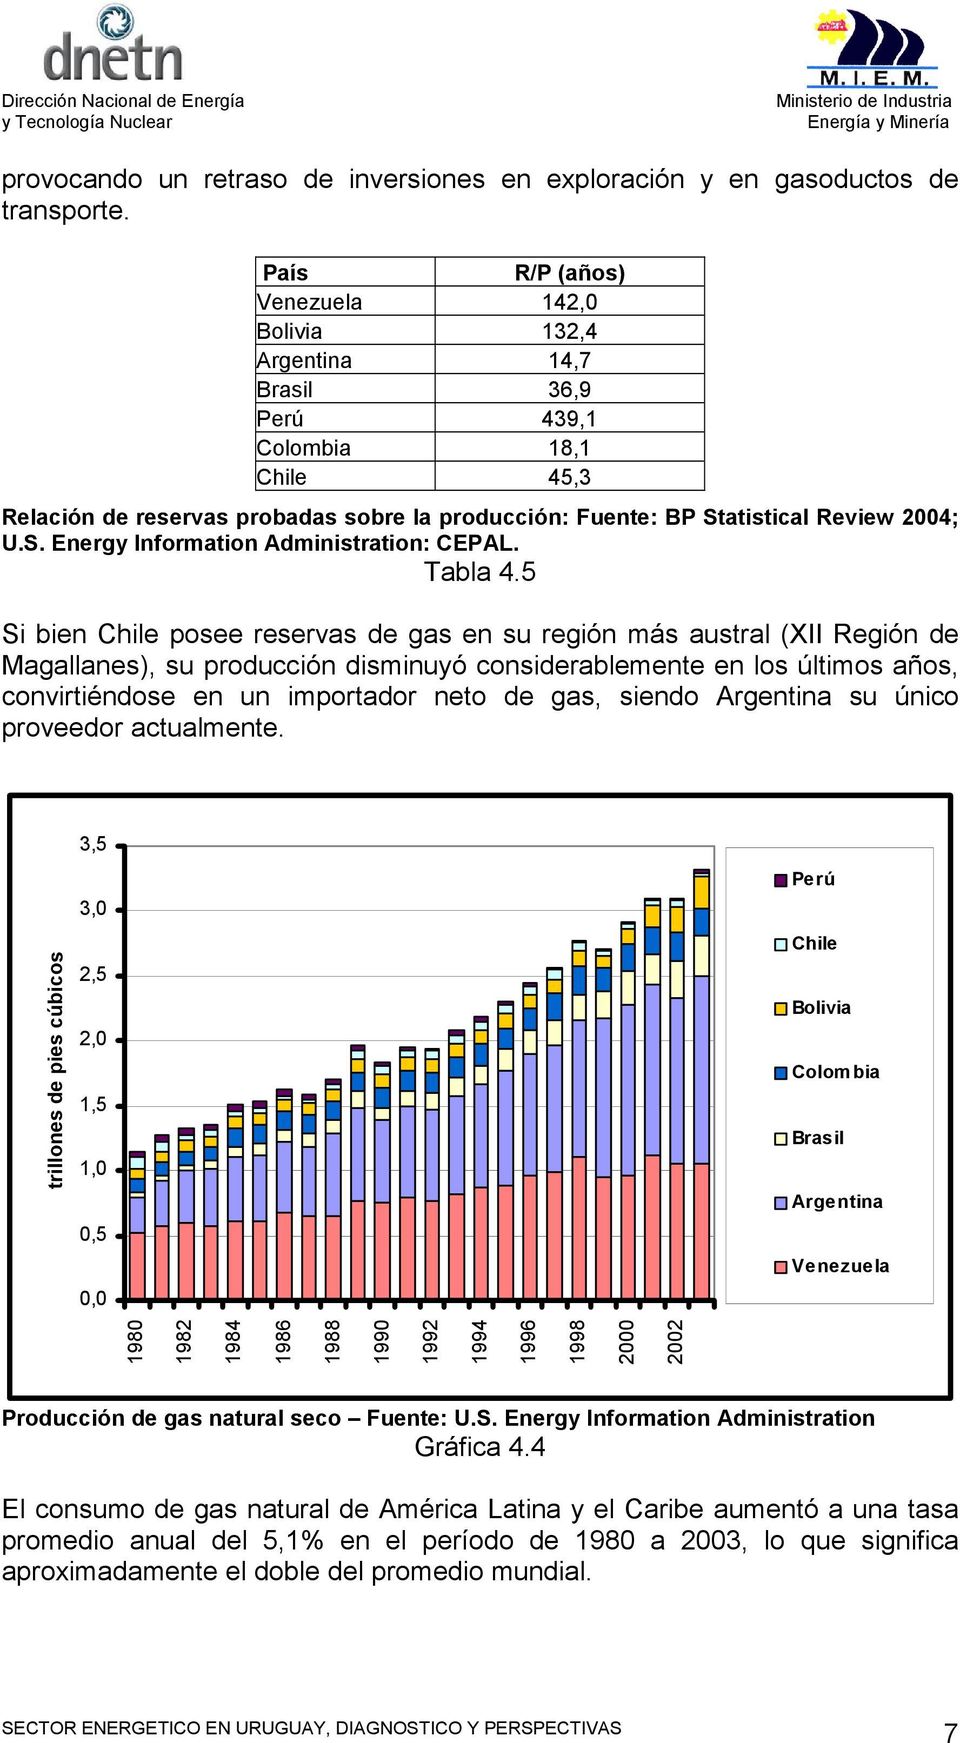 atistical Review 2004; U.S. Energy Information Administration: CEPAL. Tabla 4.